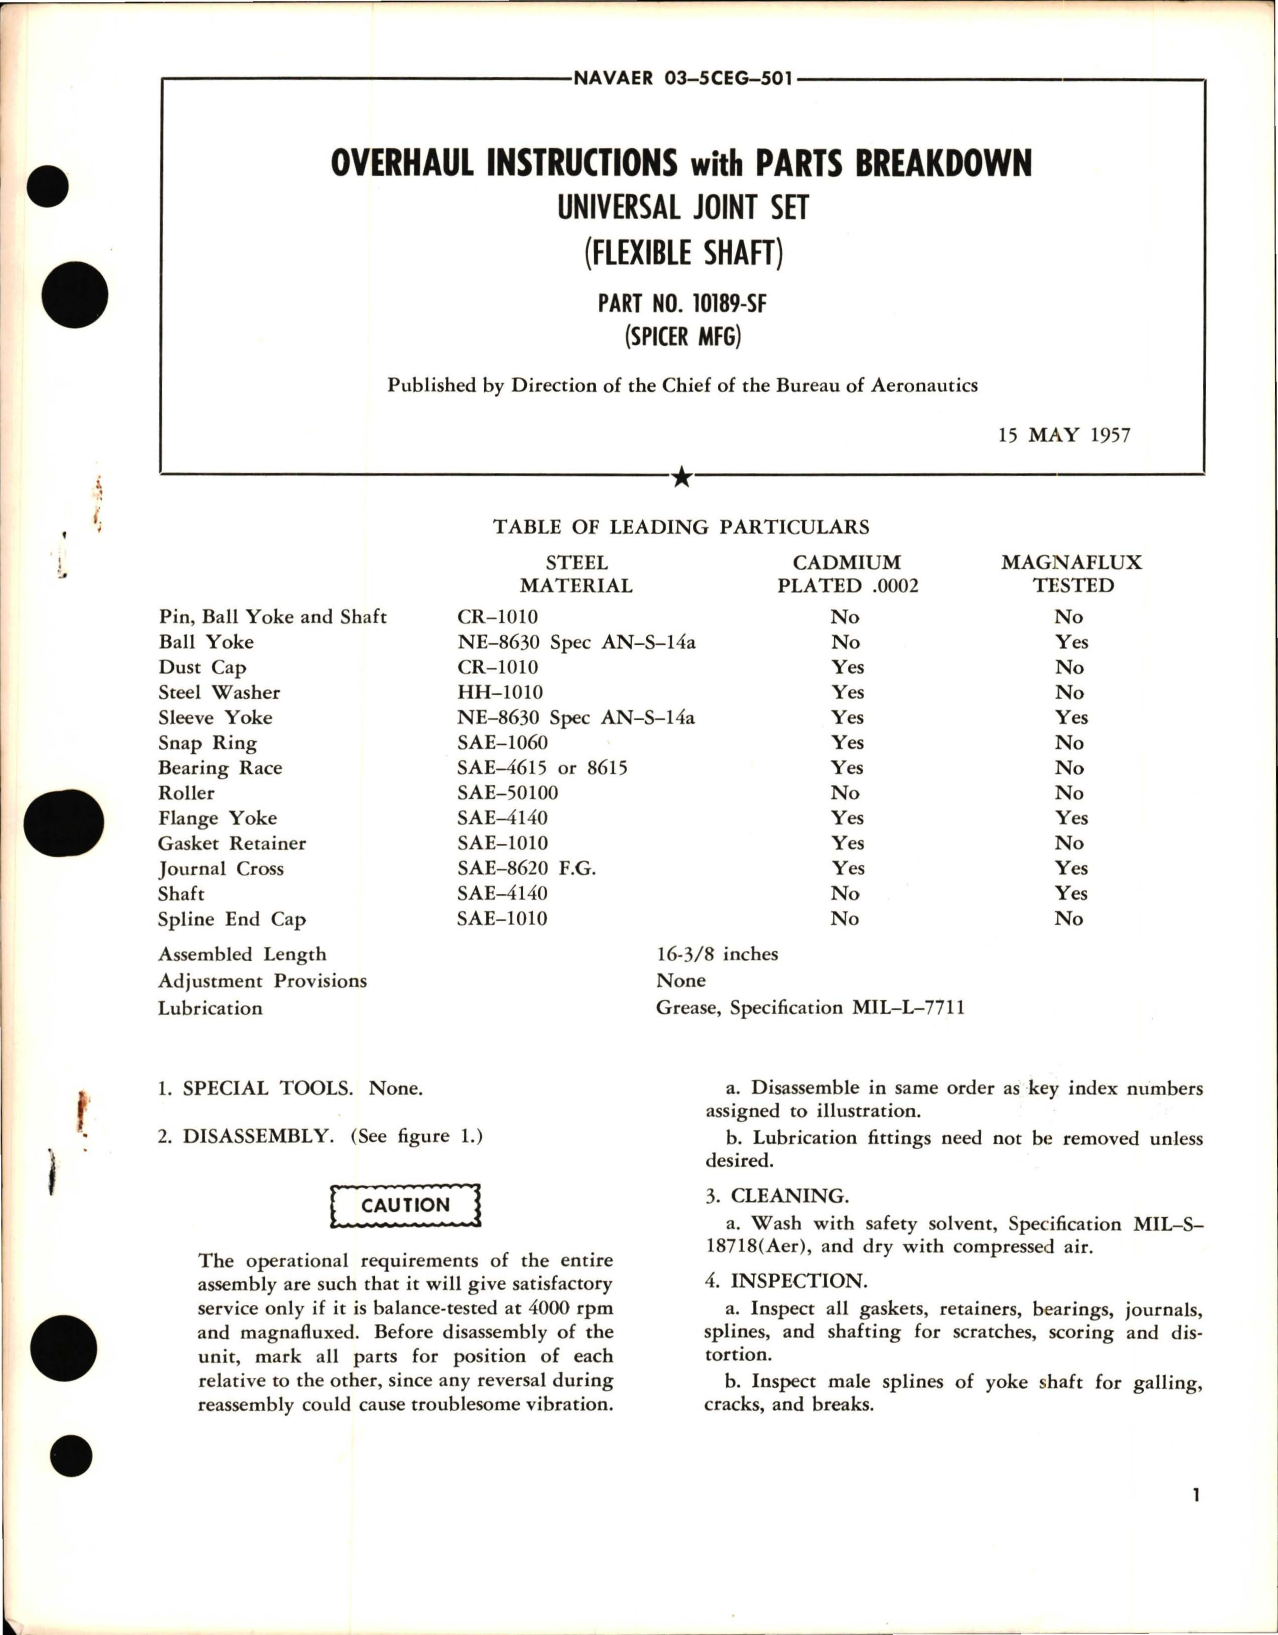 Sample page 1 from AirCorps Library document: Overhaul Instructions with Parts Breakdown for Universal Joint Set Flexible Shaft - Part 10189-SF